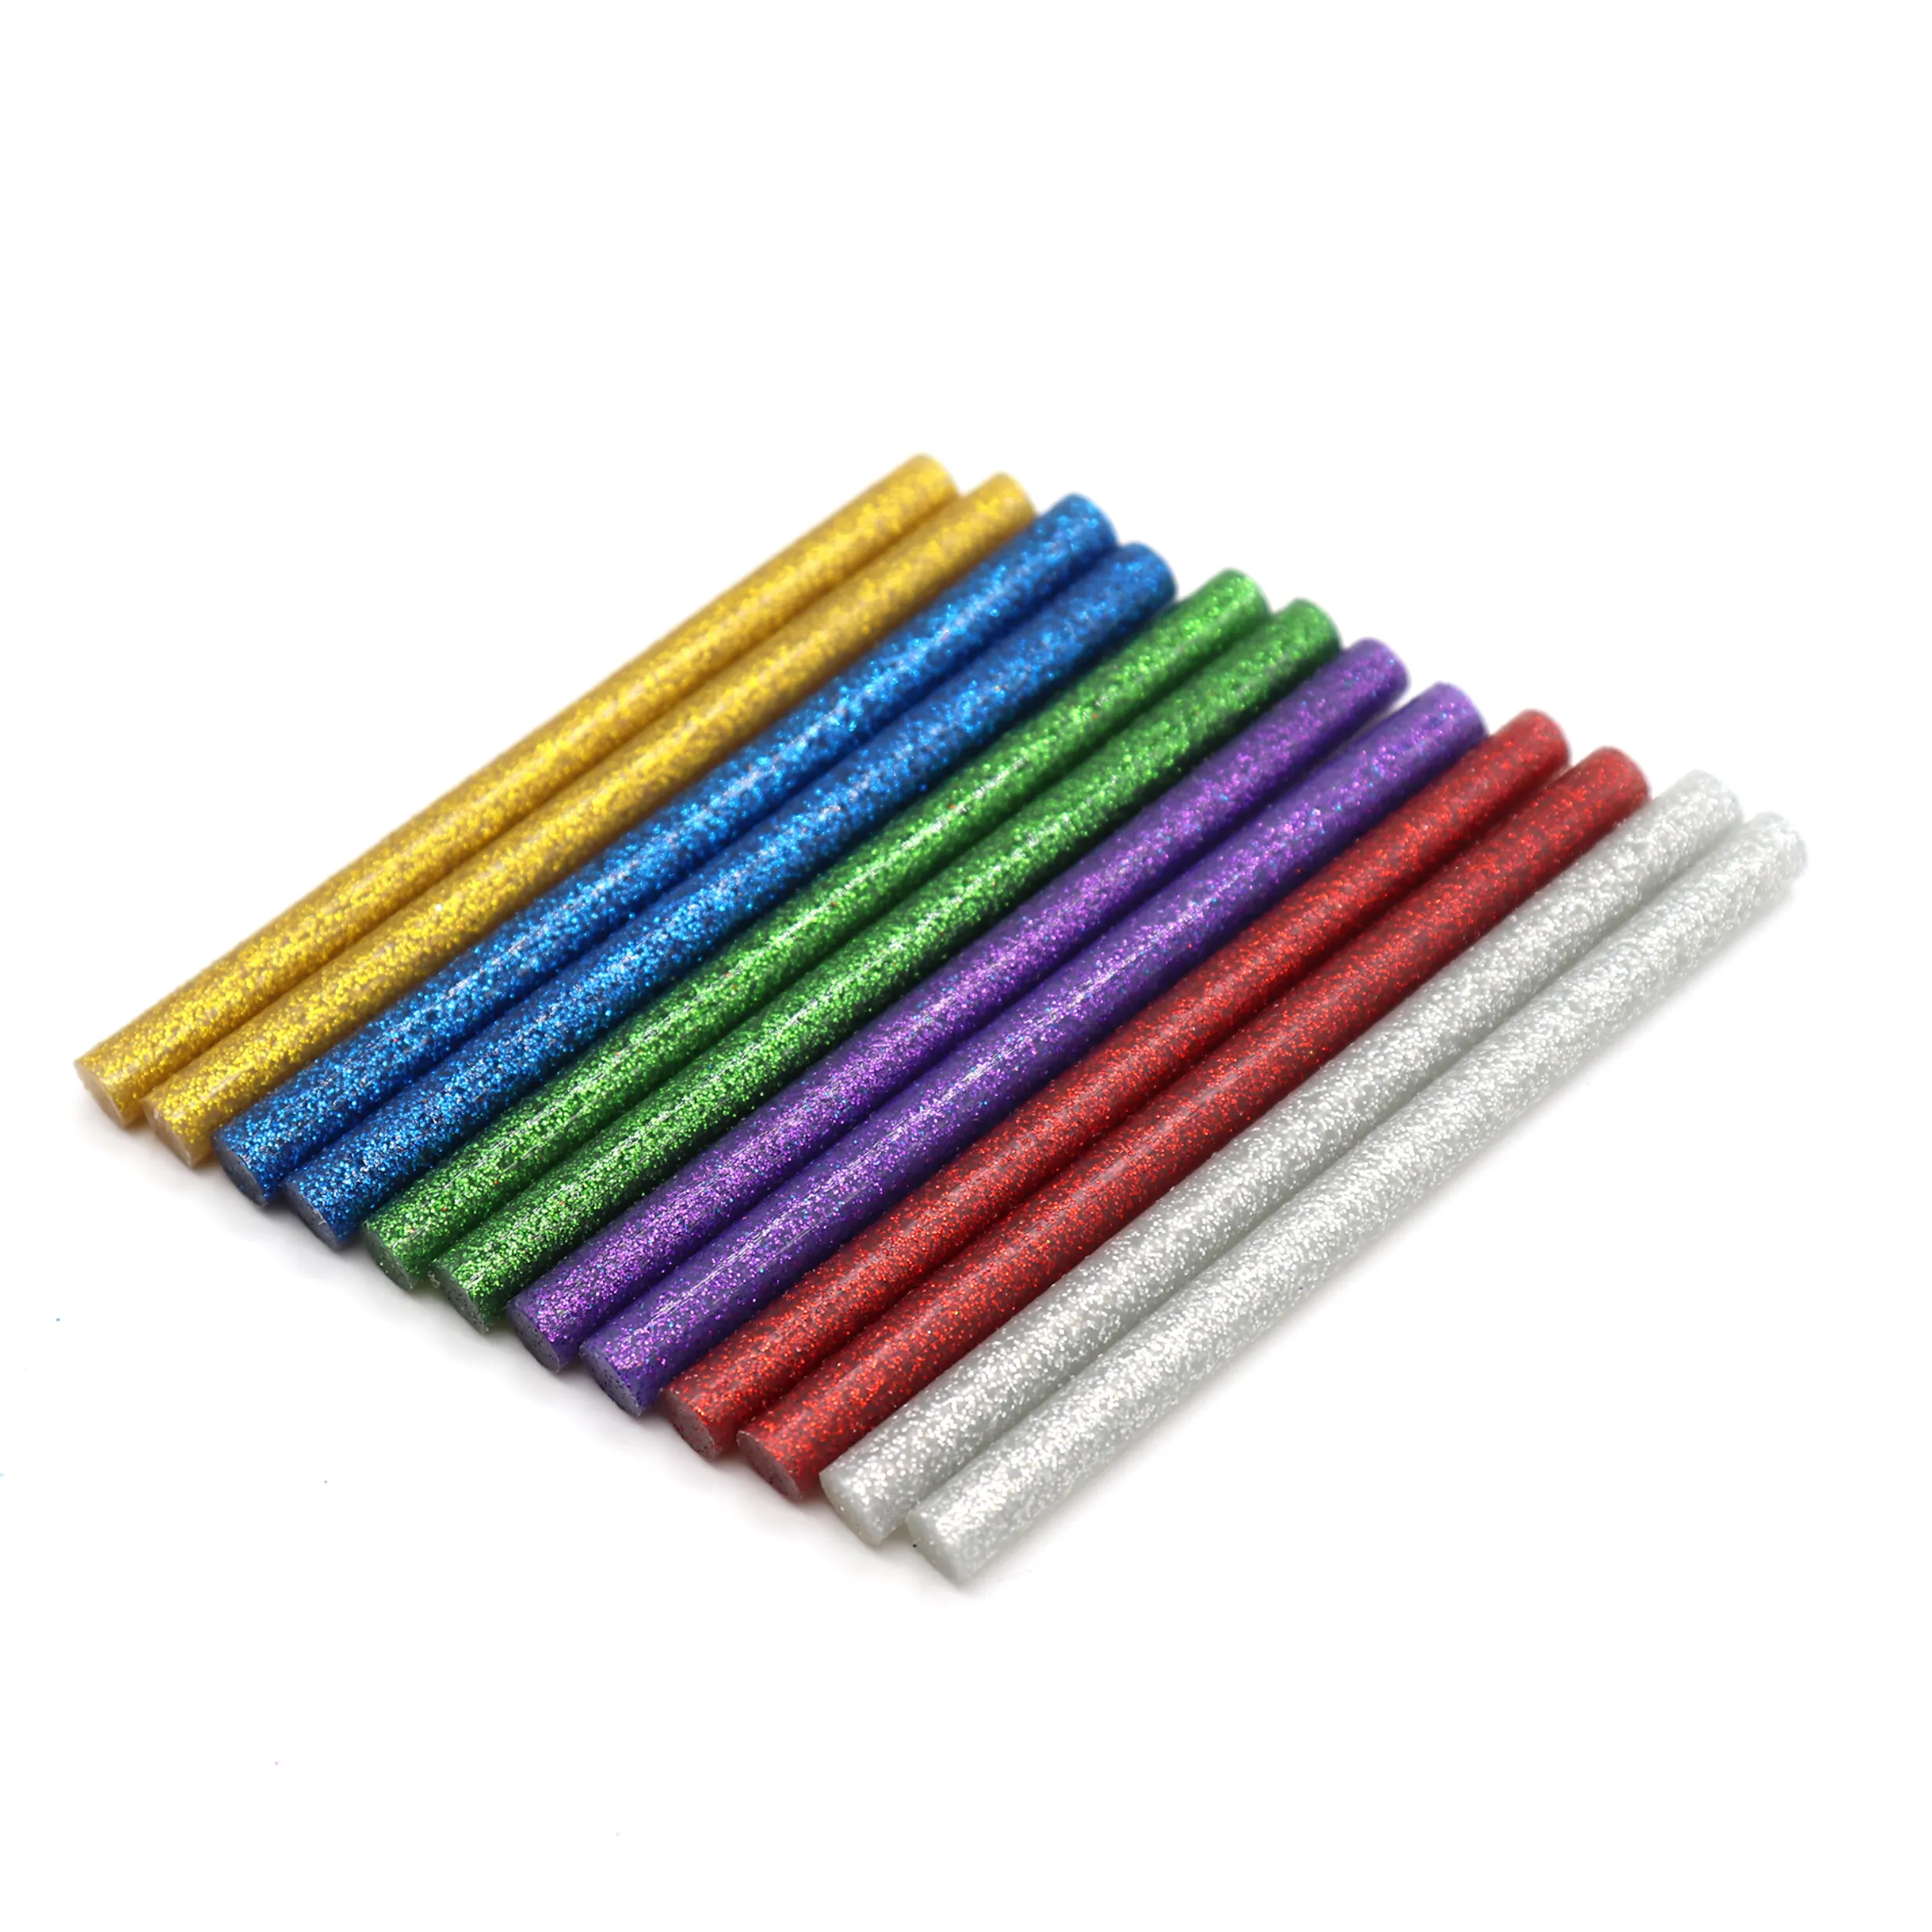 Suppliers Factory wholesale Color of the hot melt glue sticks EVA 7/12mm glue sticks For DIY Projects